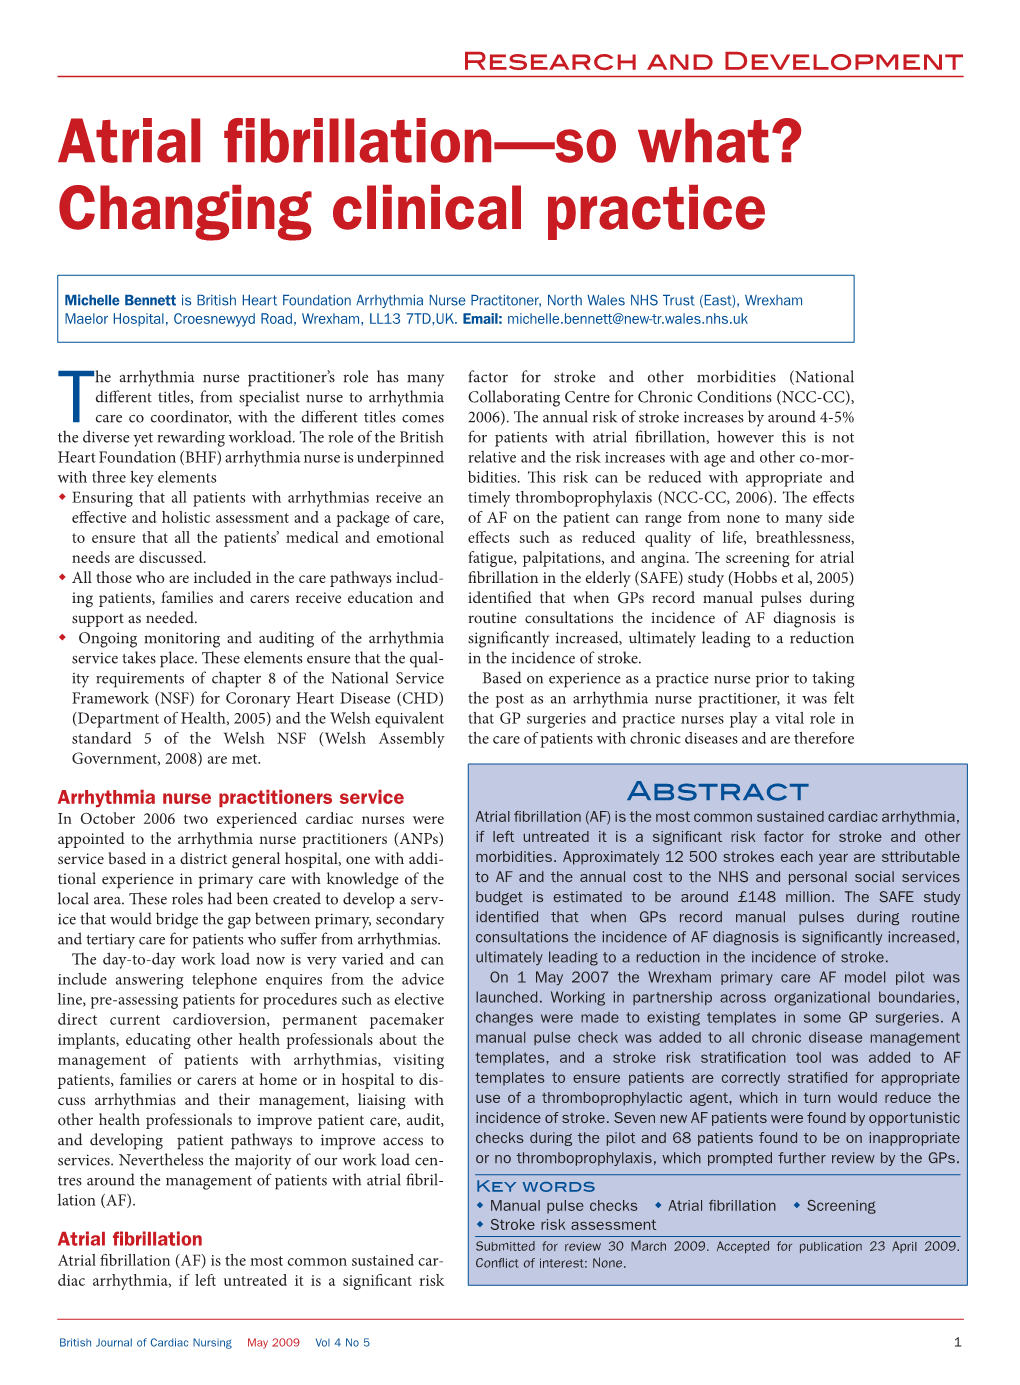 Atrial Fibrillation—So What? Changing Clinical Practice